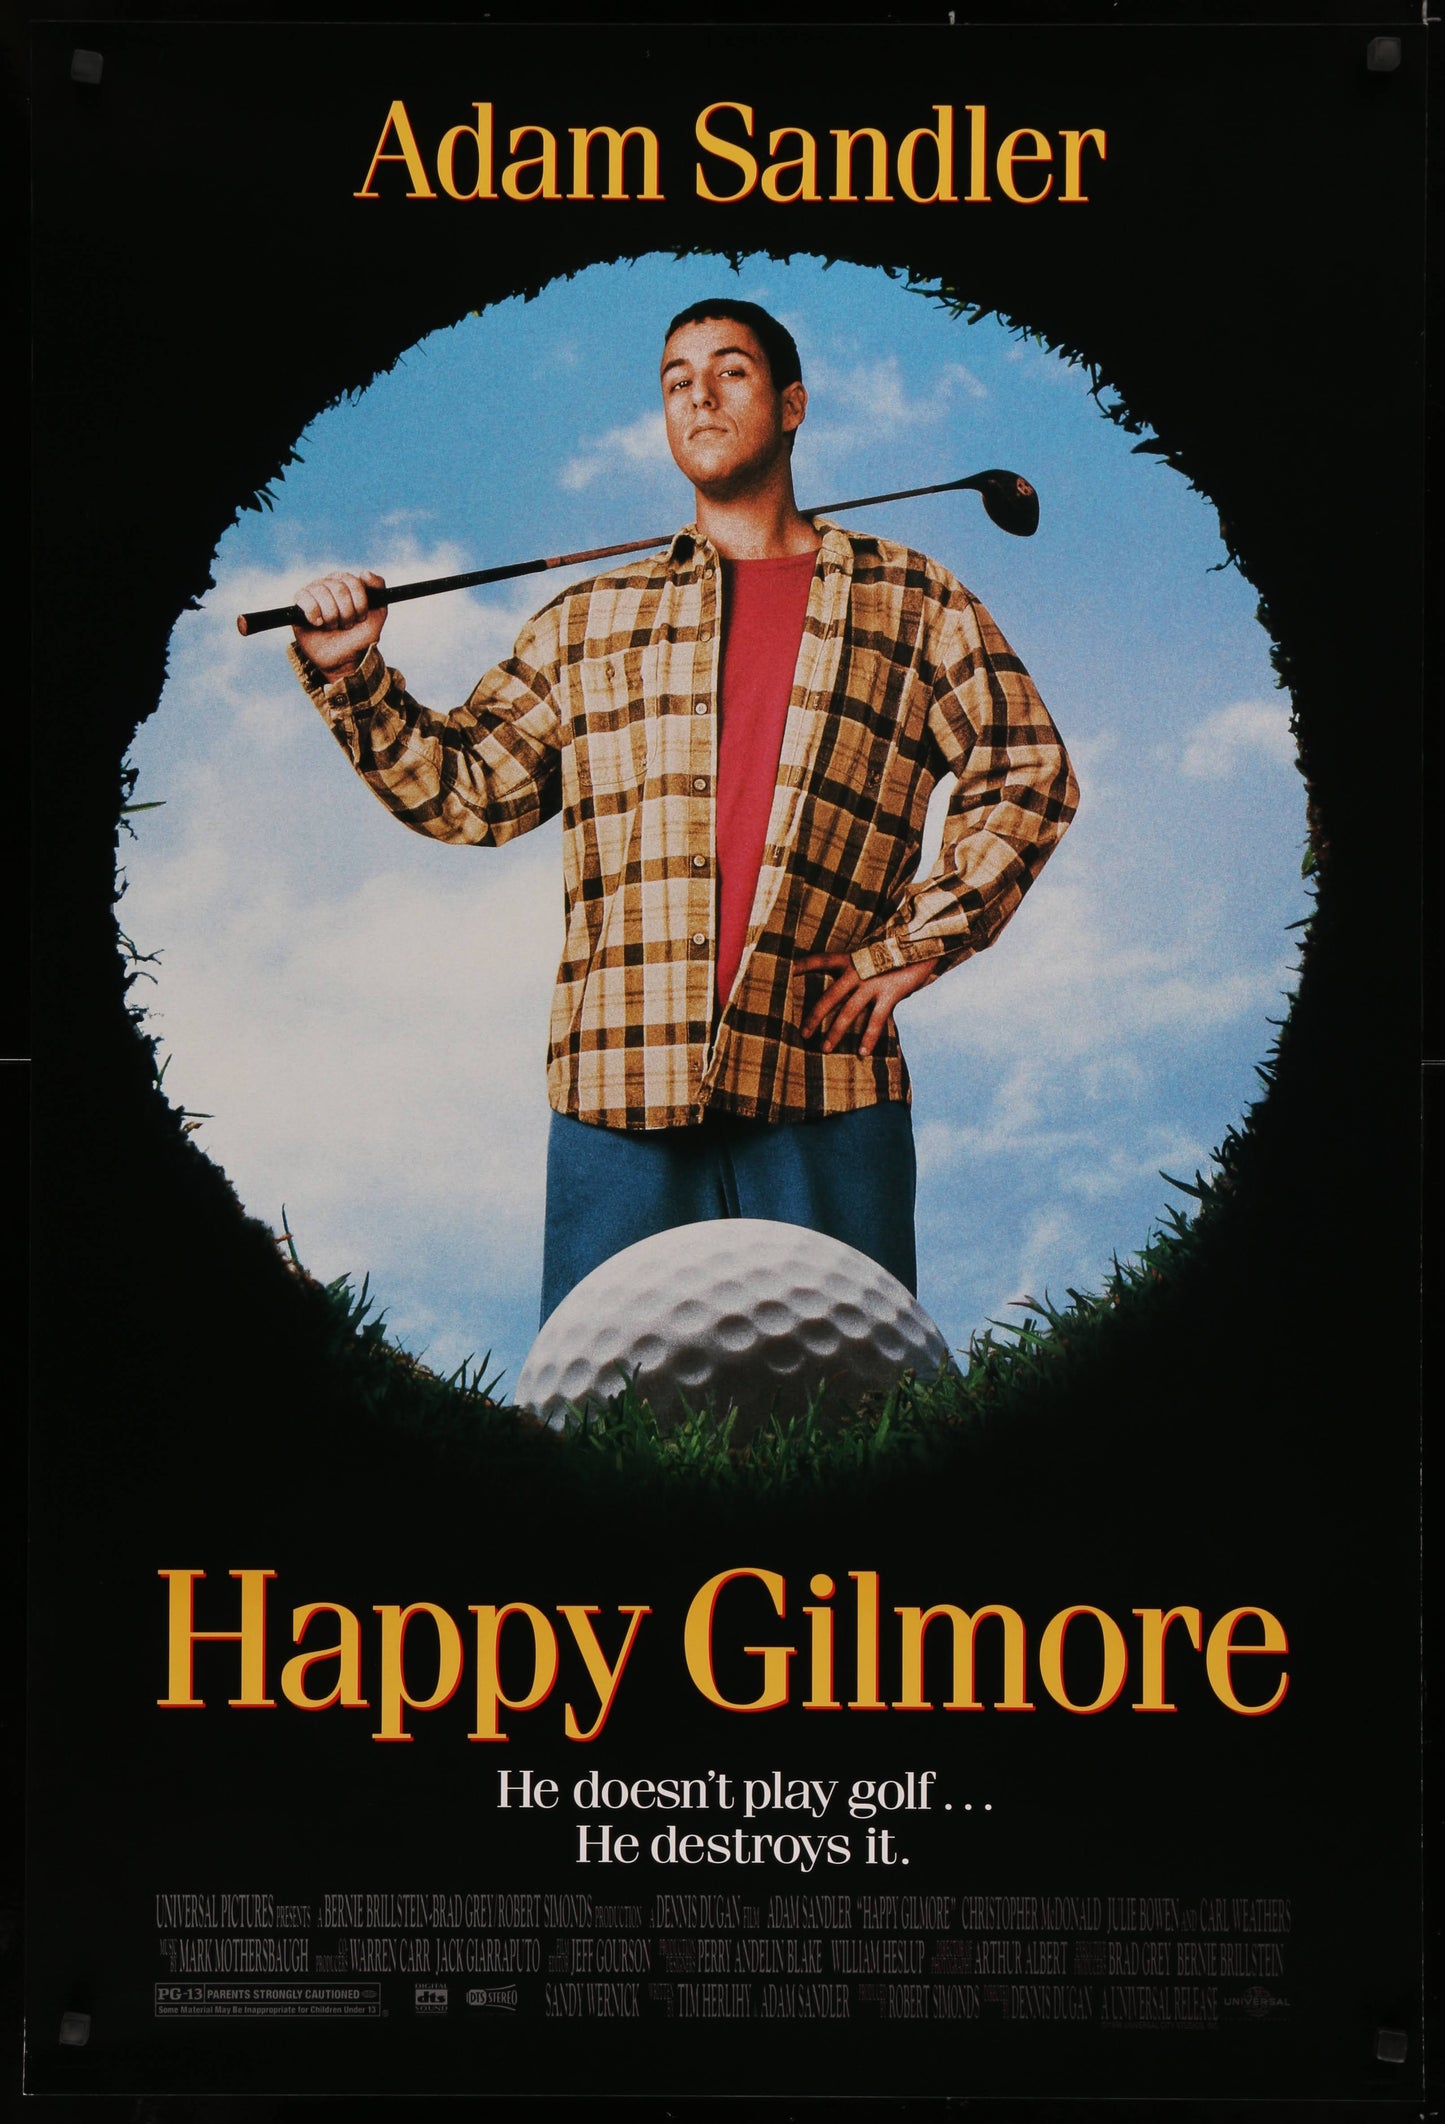 Happy Gilmore US One Sheet (1996) - ORIGINAL RELEASE - posterpalace.com